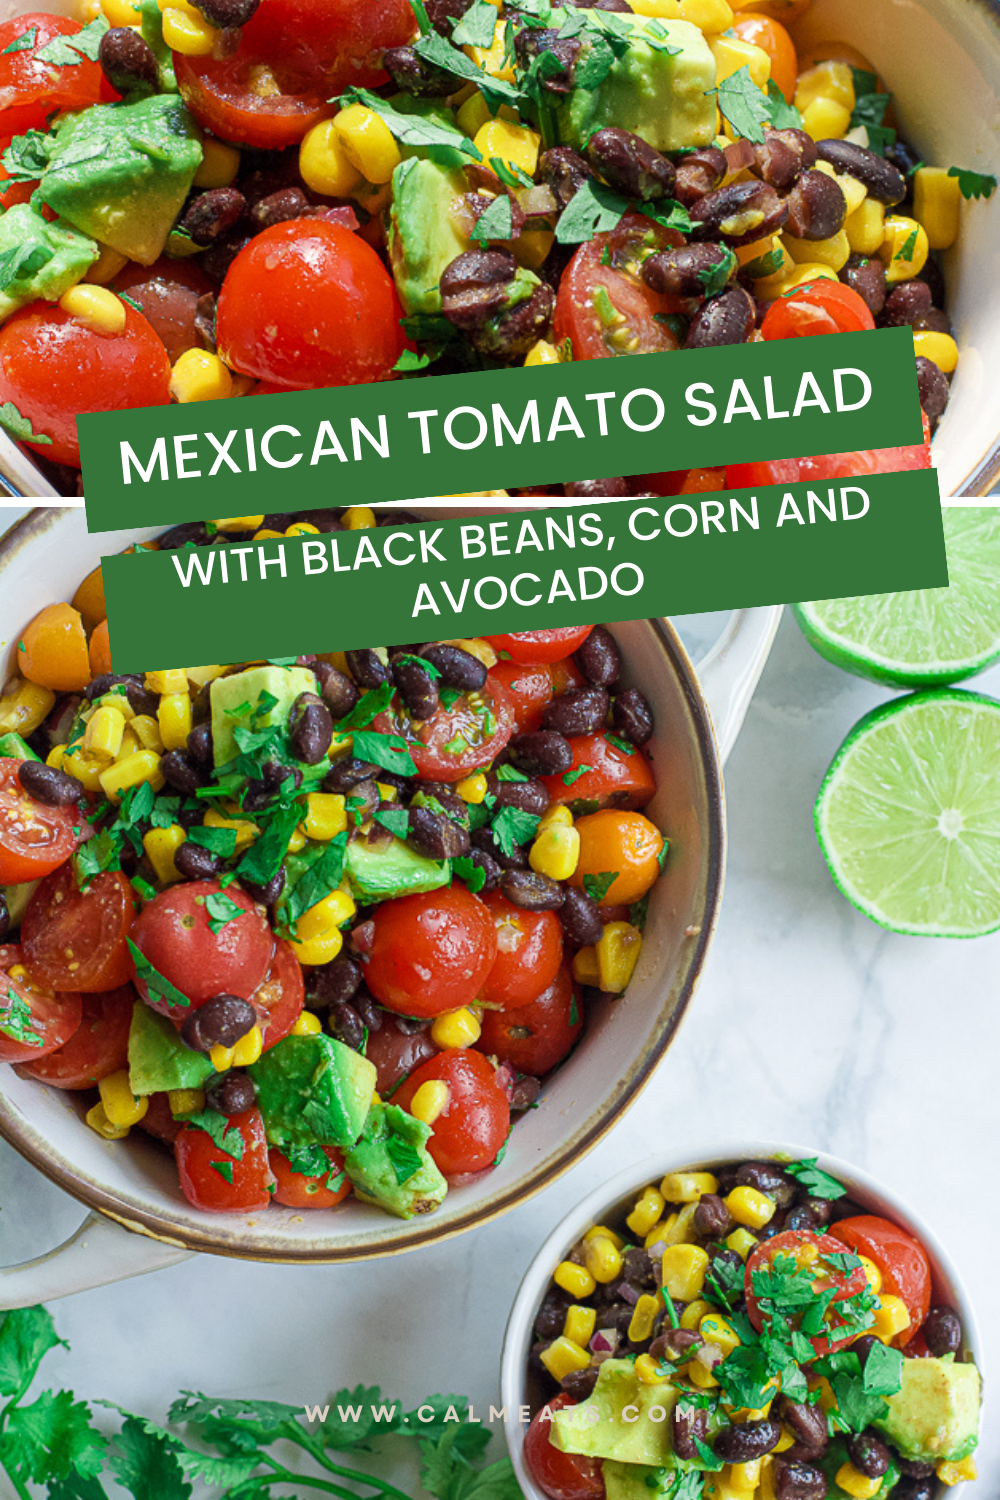 Mexican Tomato Salad with Black Beans, Corn and Avocado - Calm Eats